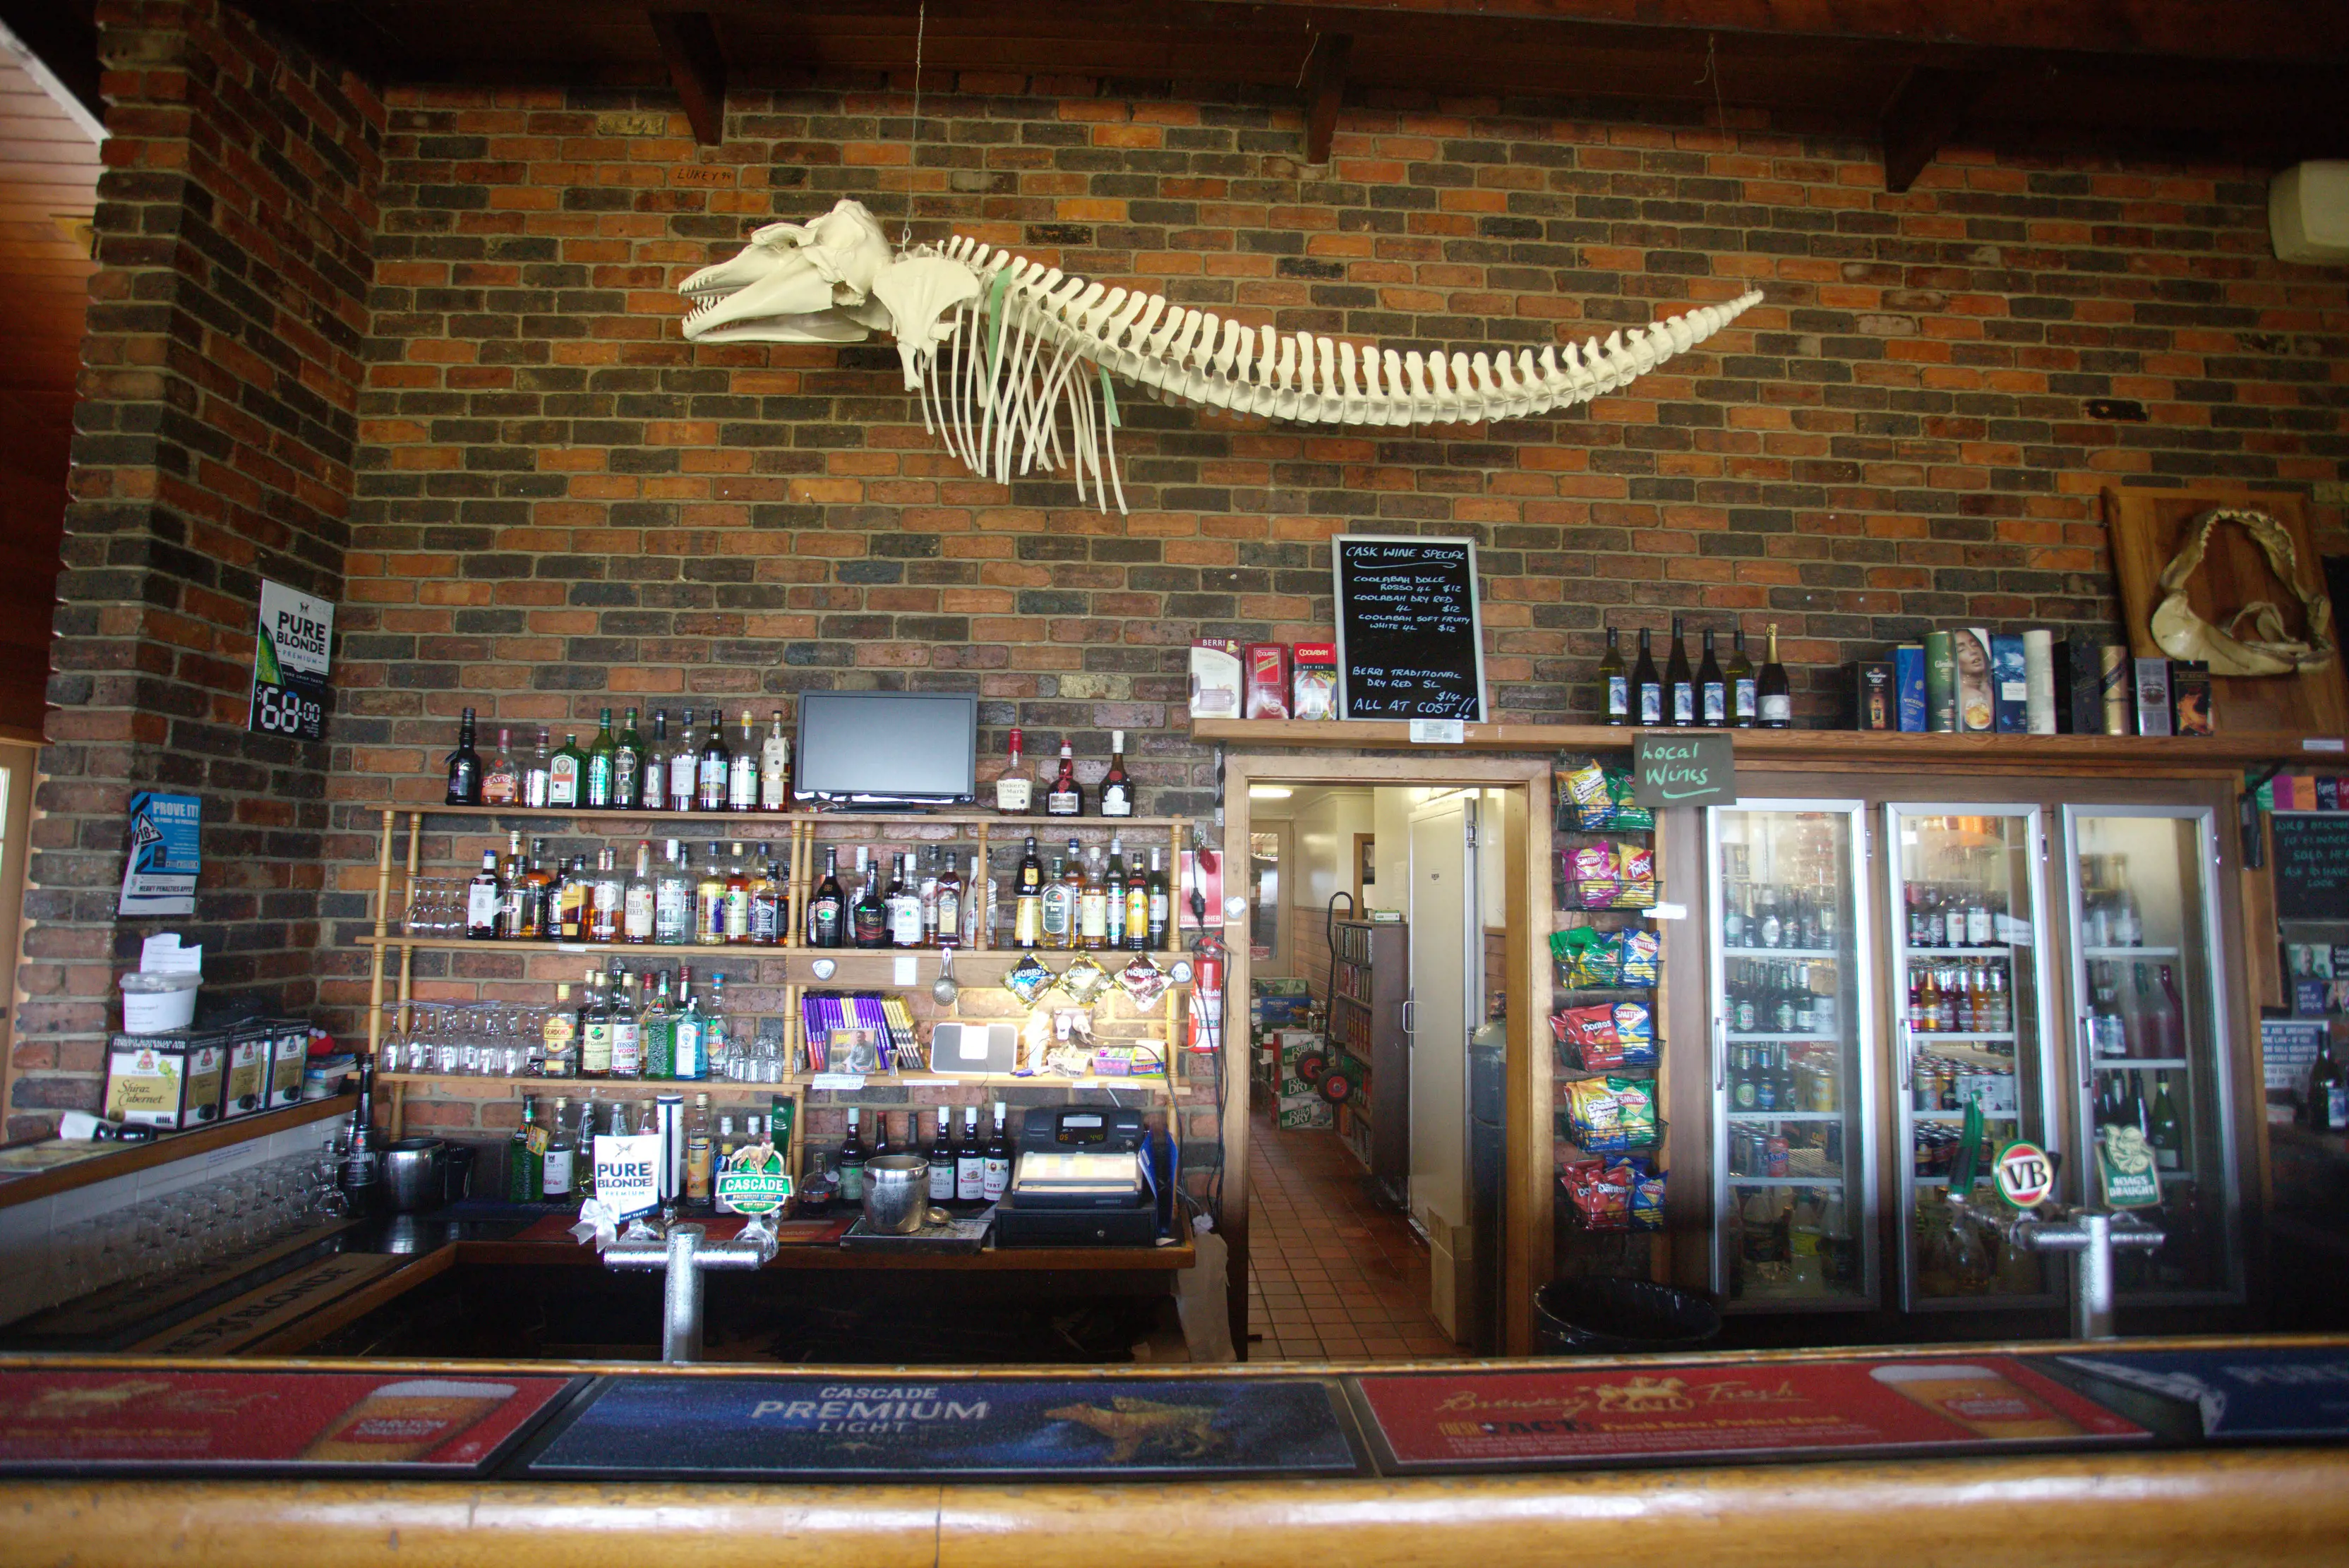 Image of inside Furneaux Tavern, fridges containing alcohol and old brick walls with a large ocean animal's skeleton hanging up.